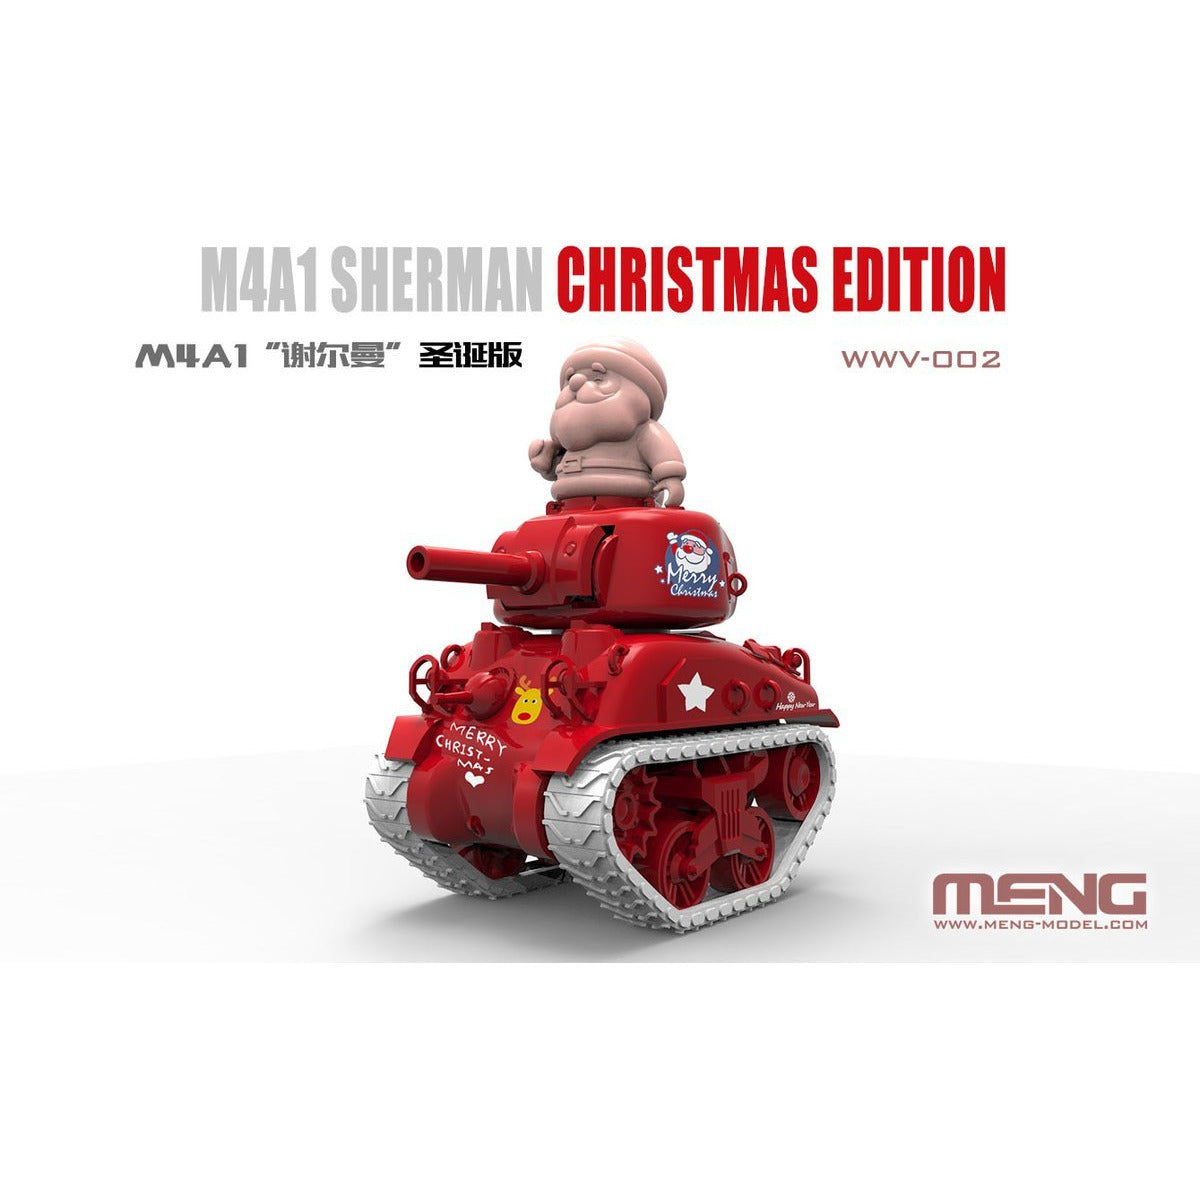 M4A1 Sherman Christmas Edition by Meng